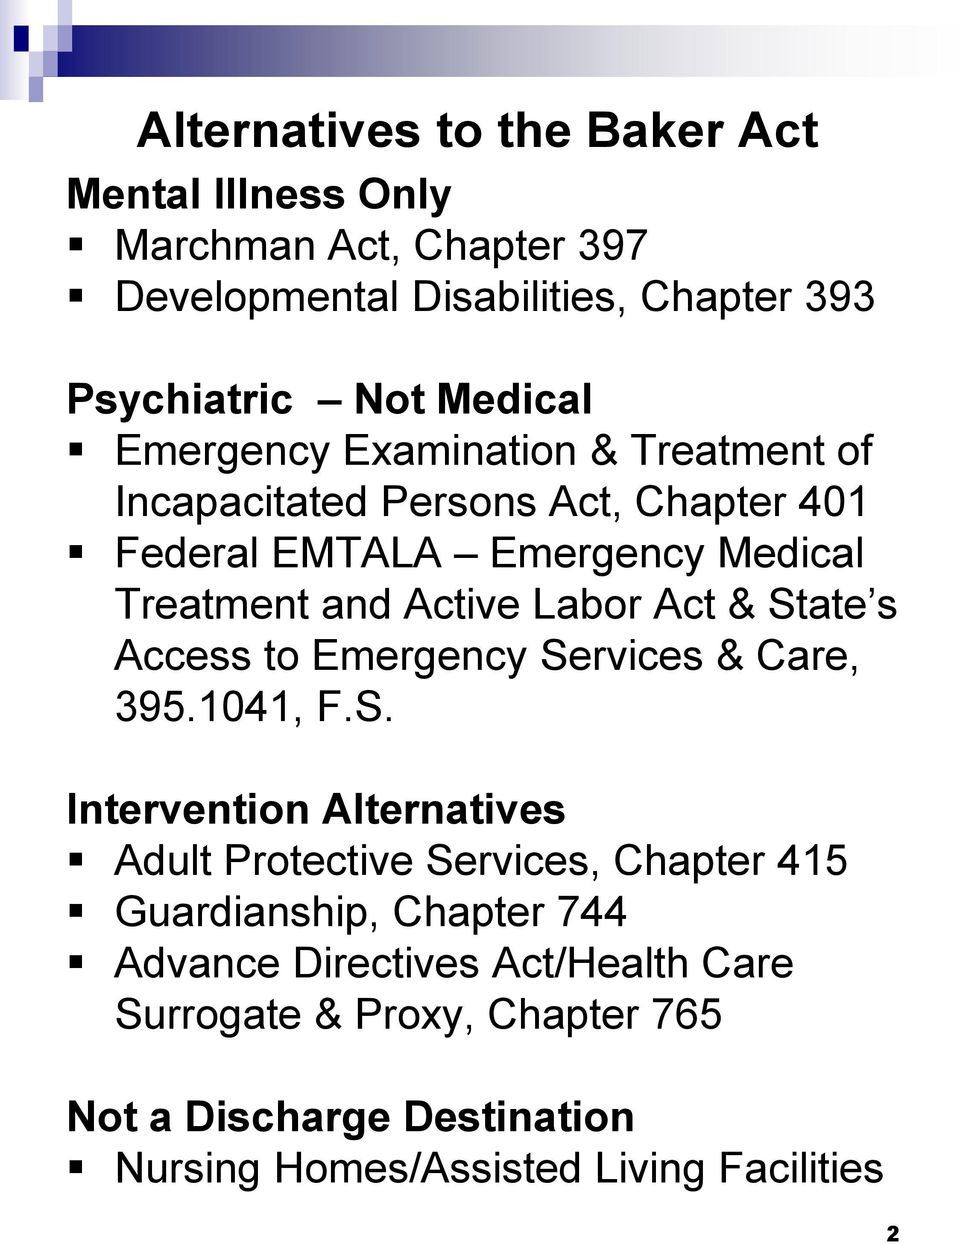 State s Access to Emergency Services & Care, 395.1041, F.S. Intervention Alternatives Adult Protective Services, Chapter 415 Guardianship,